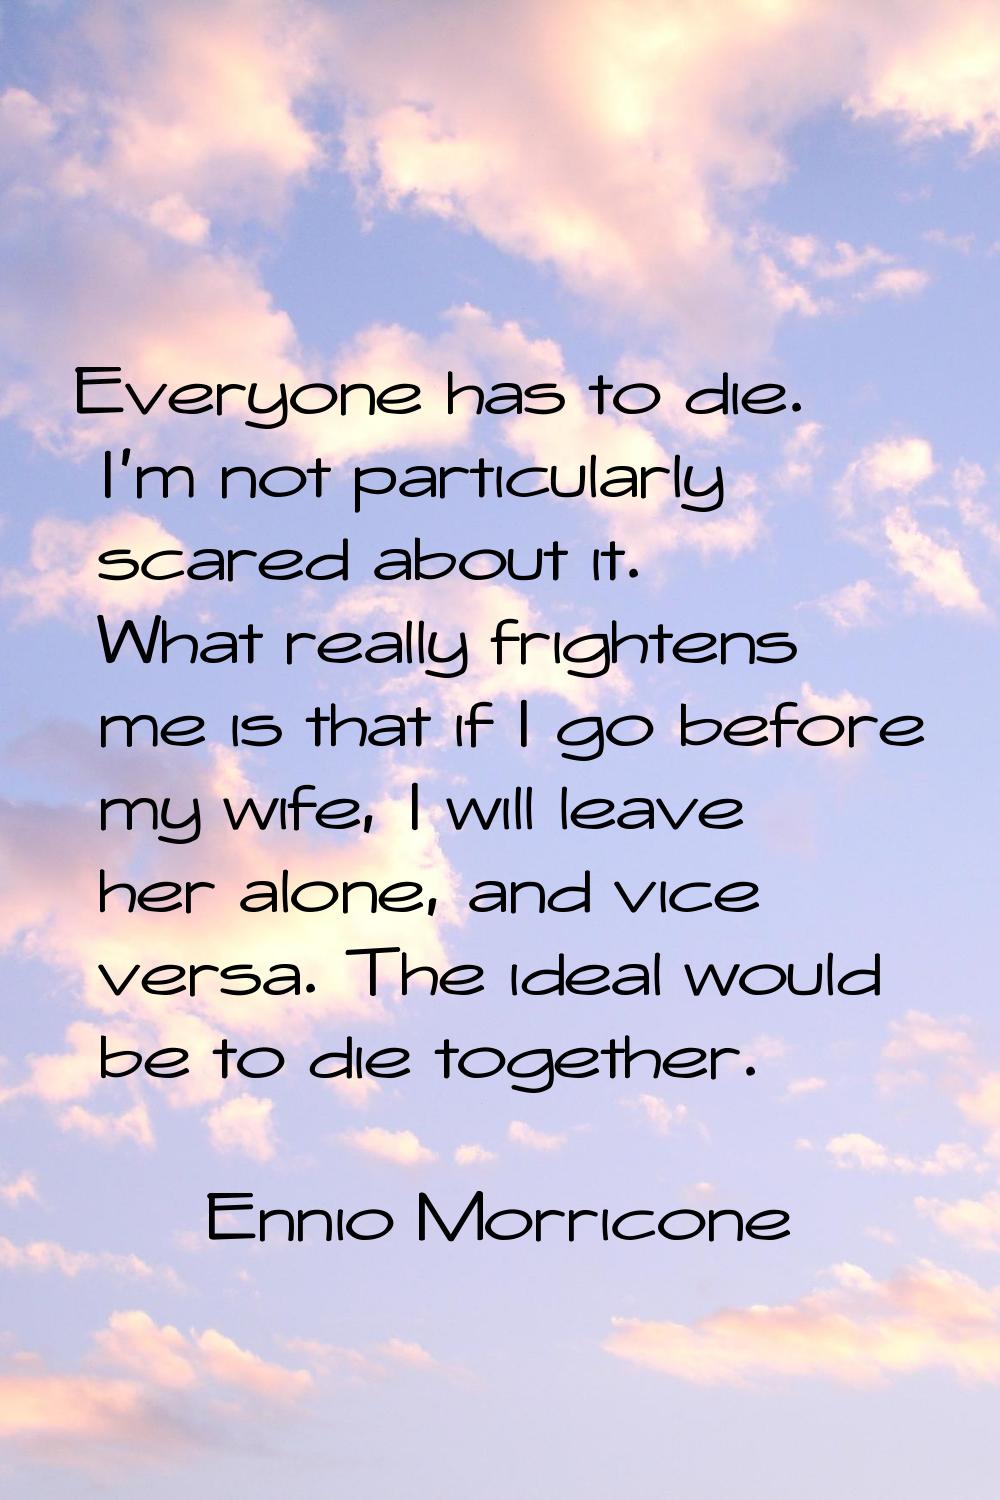 Everyone has to die. I'm not particularly scared about it. What really frightens me is that if I go